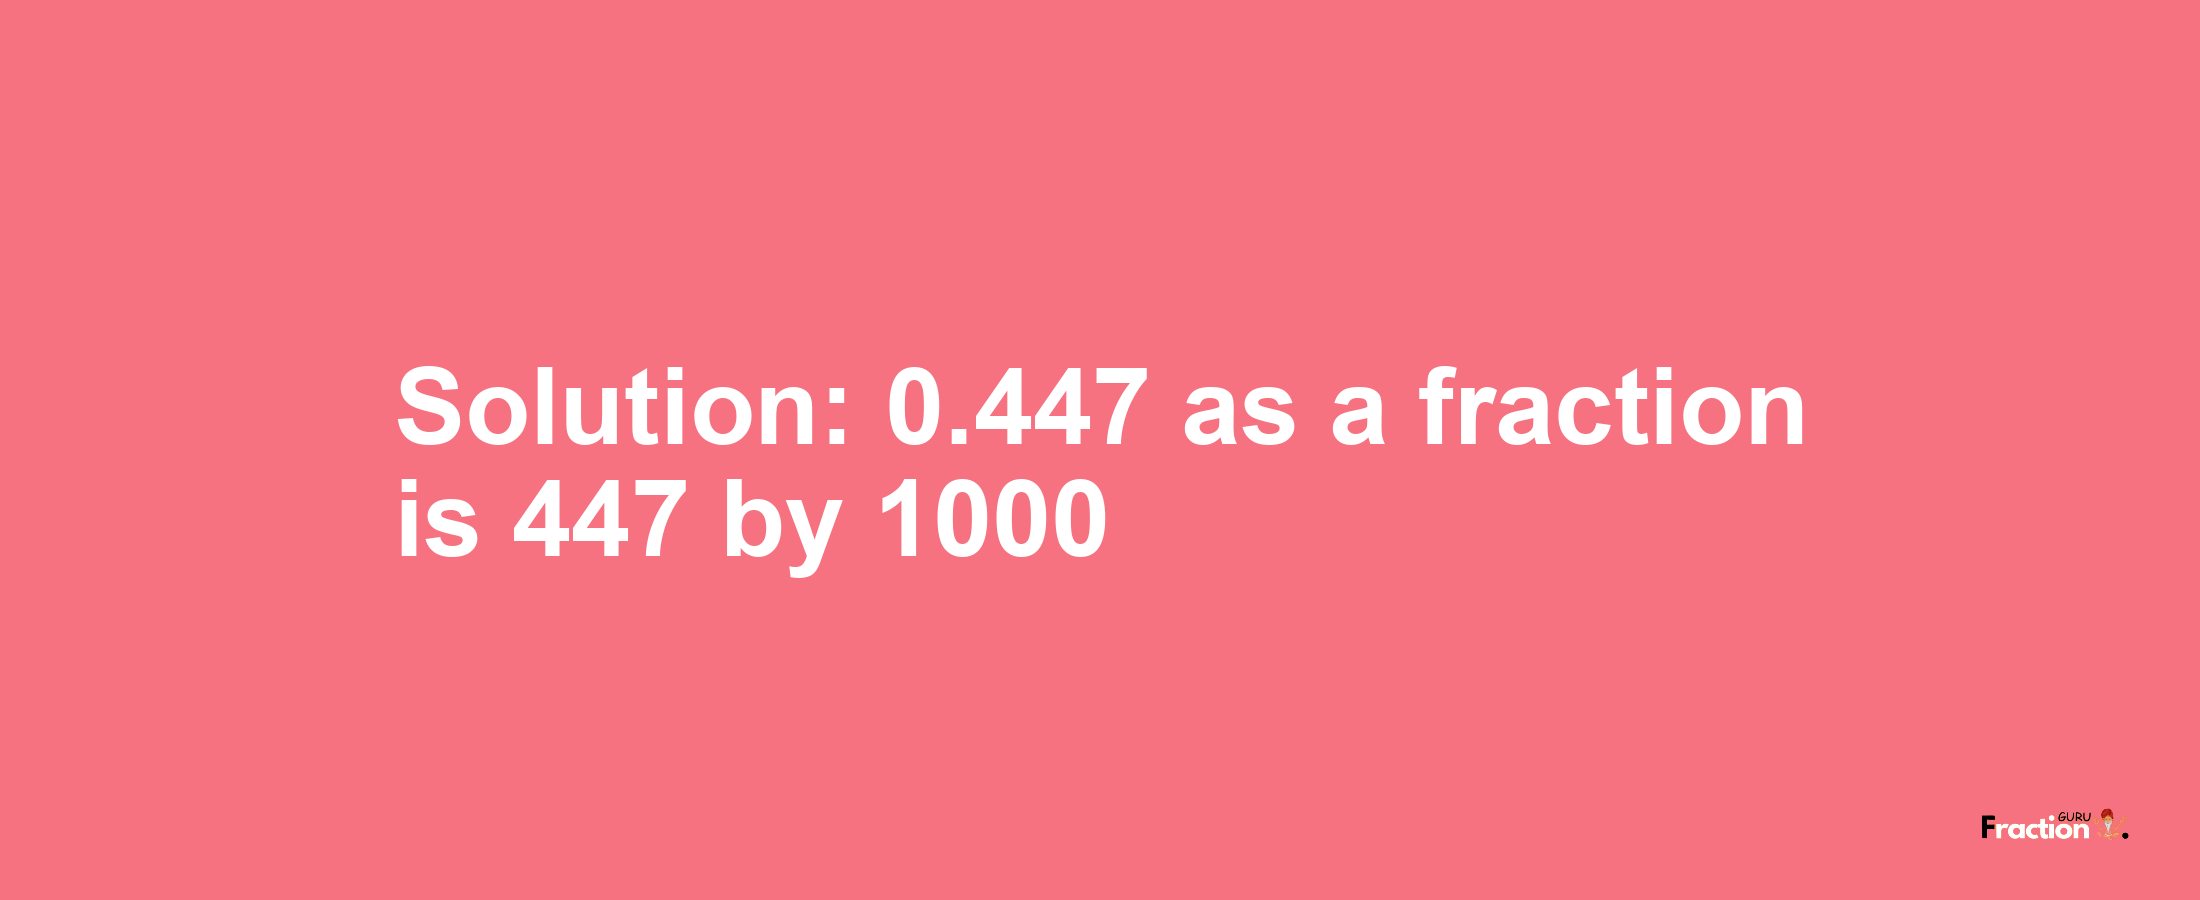 Solution:0.447 as a fraction is 447/1000